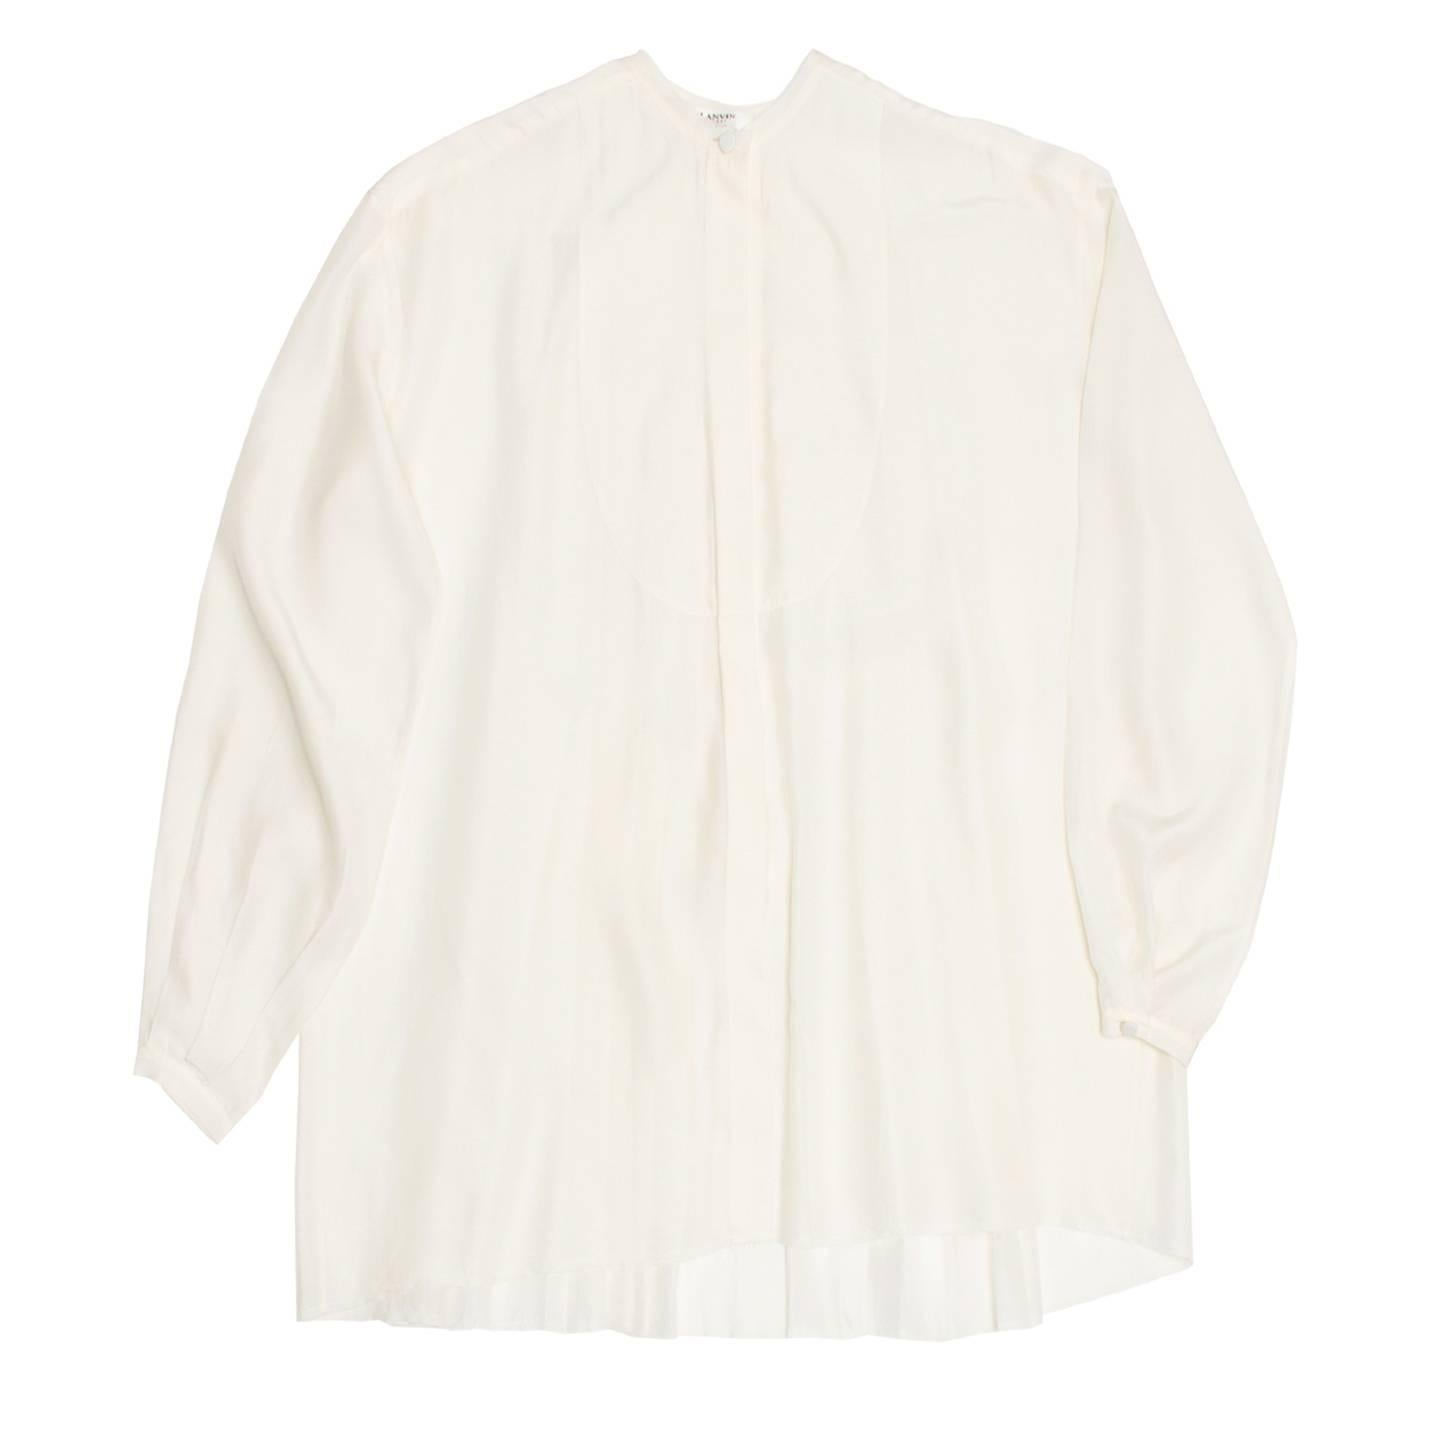 Beautiful ivory silk shirt with round collar and bib front designed by a subtle tone-on-tone line of stitching. The front is closed from bust to hem with only one self-fabric covered button at neck. The back panel is fully pleated from yoke to hem,